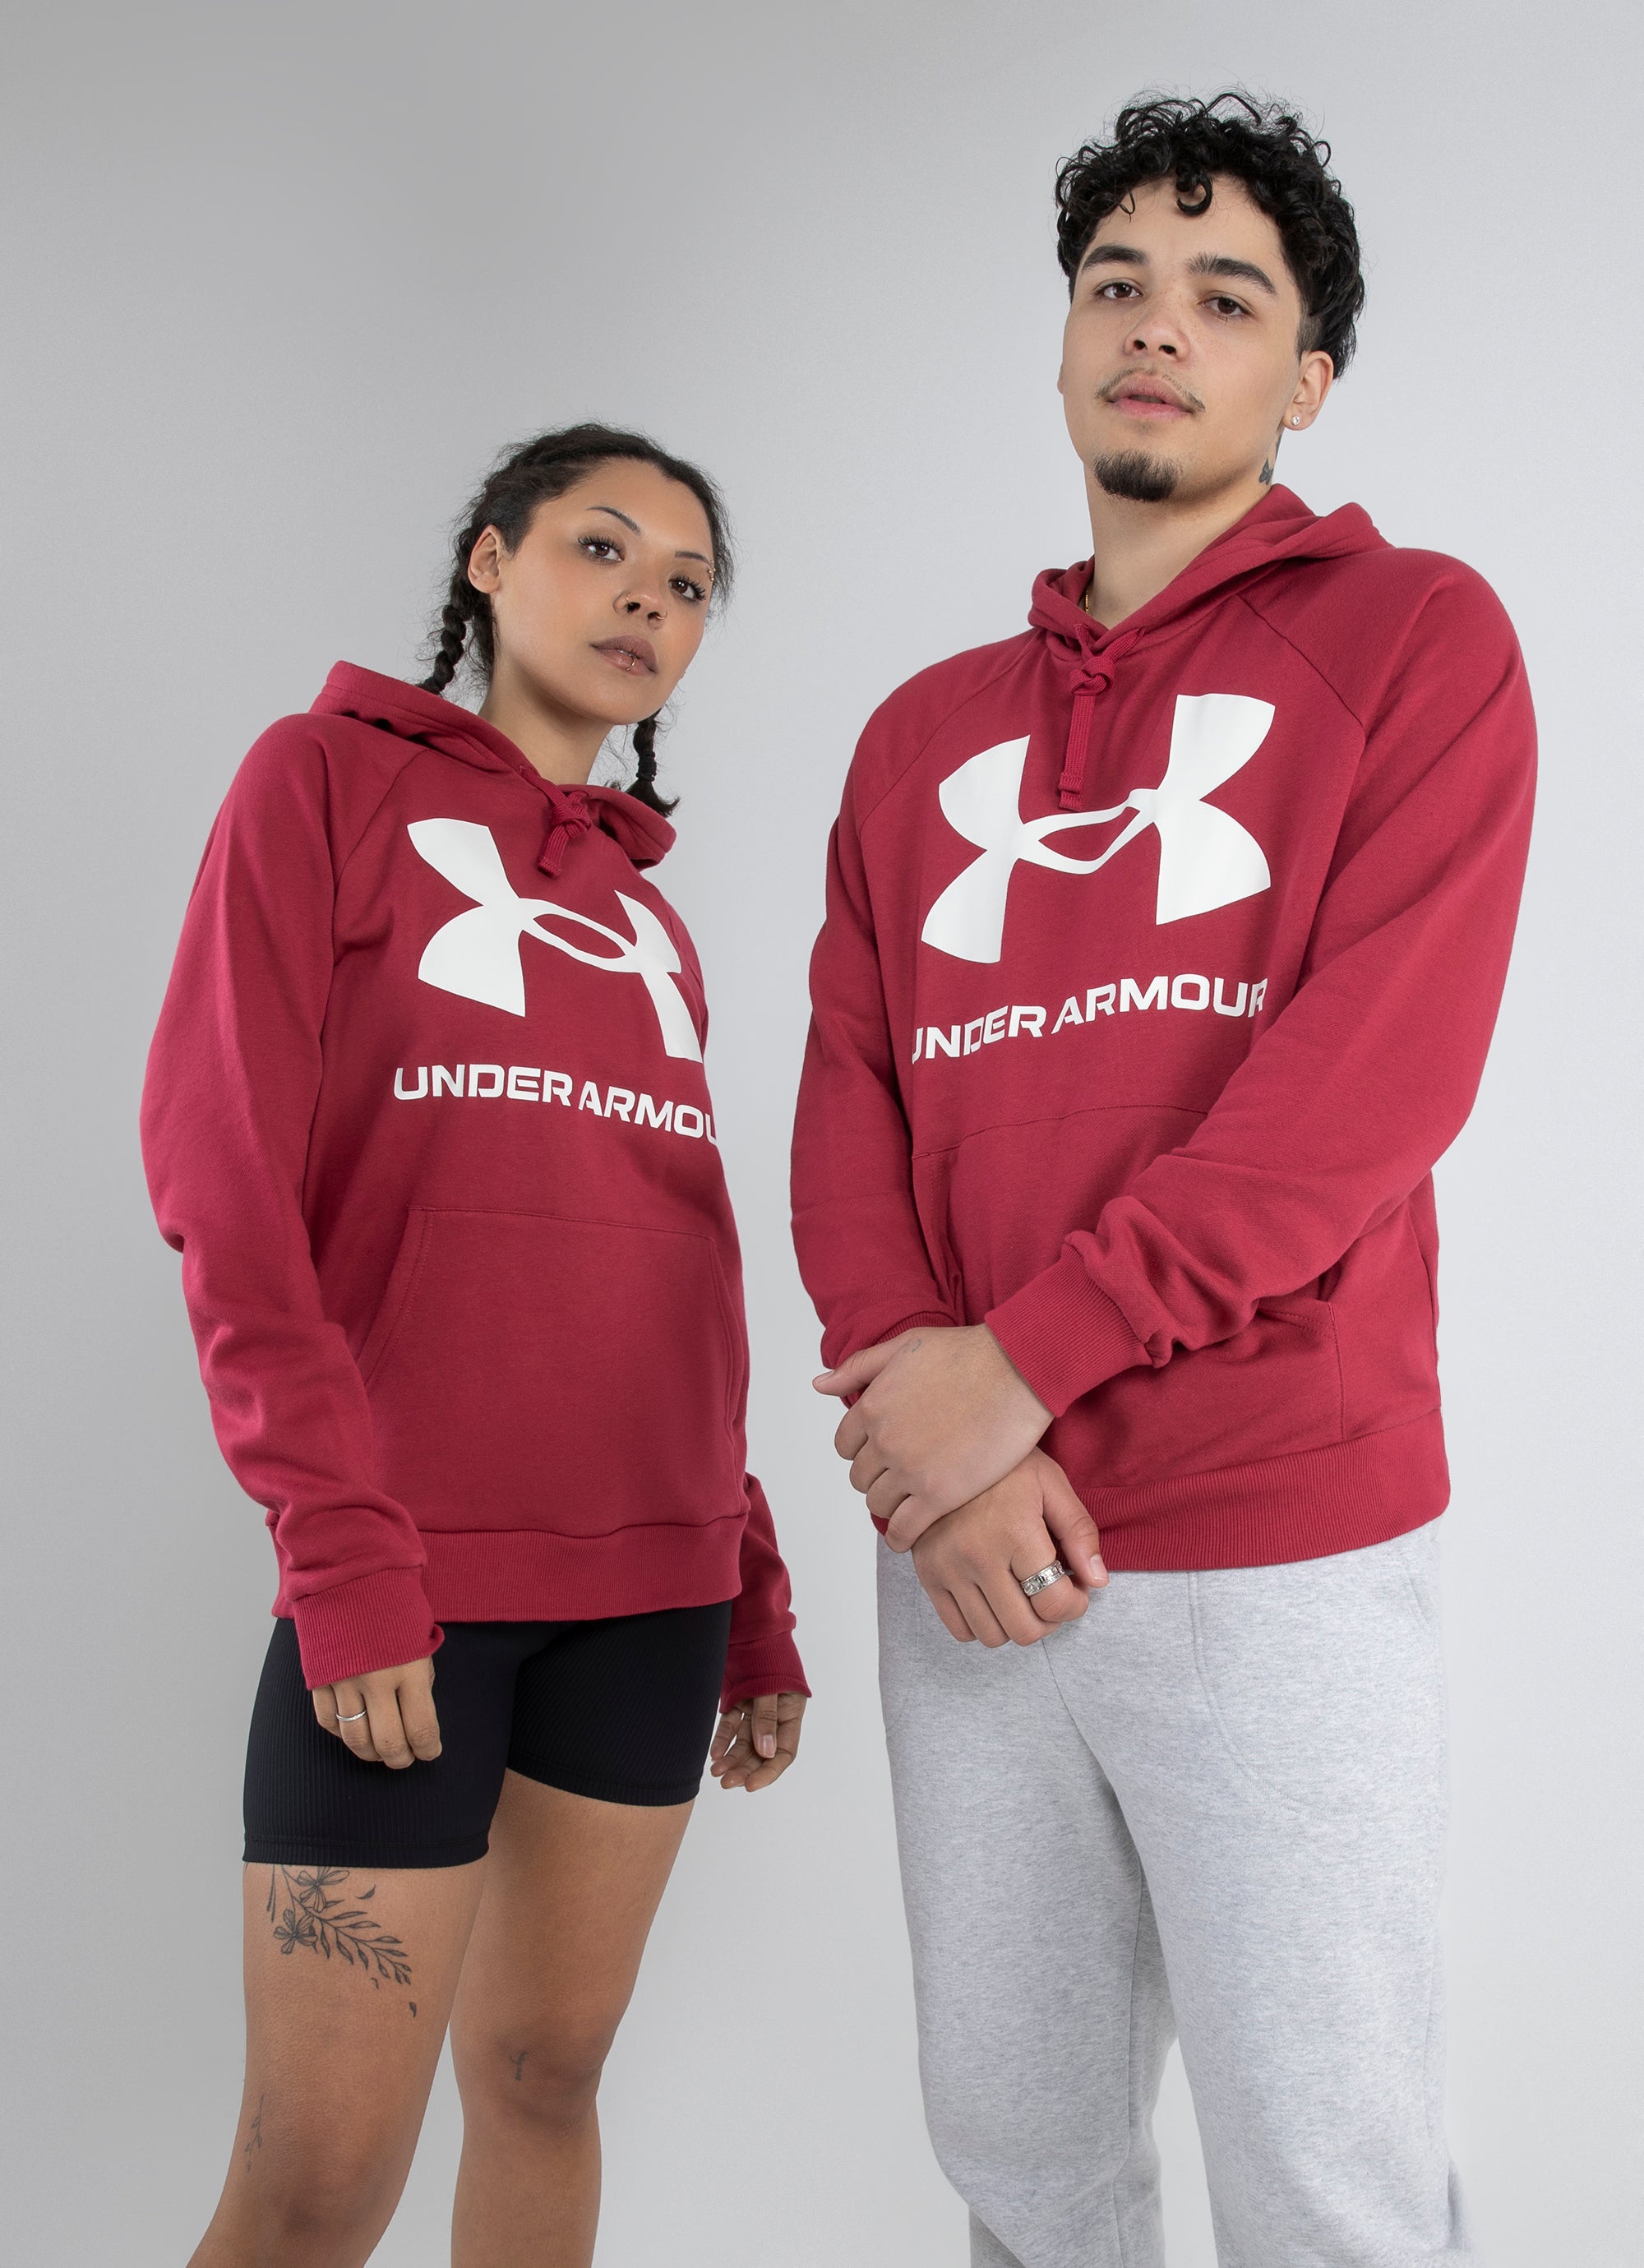 Under Armour Rival Fleece Logo Hoodie in Red